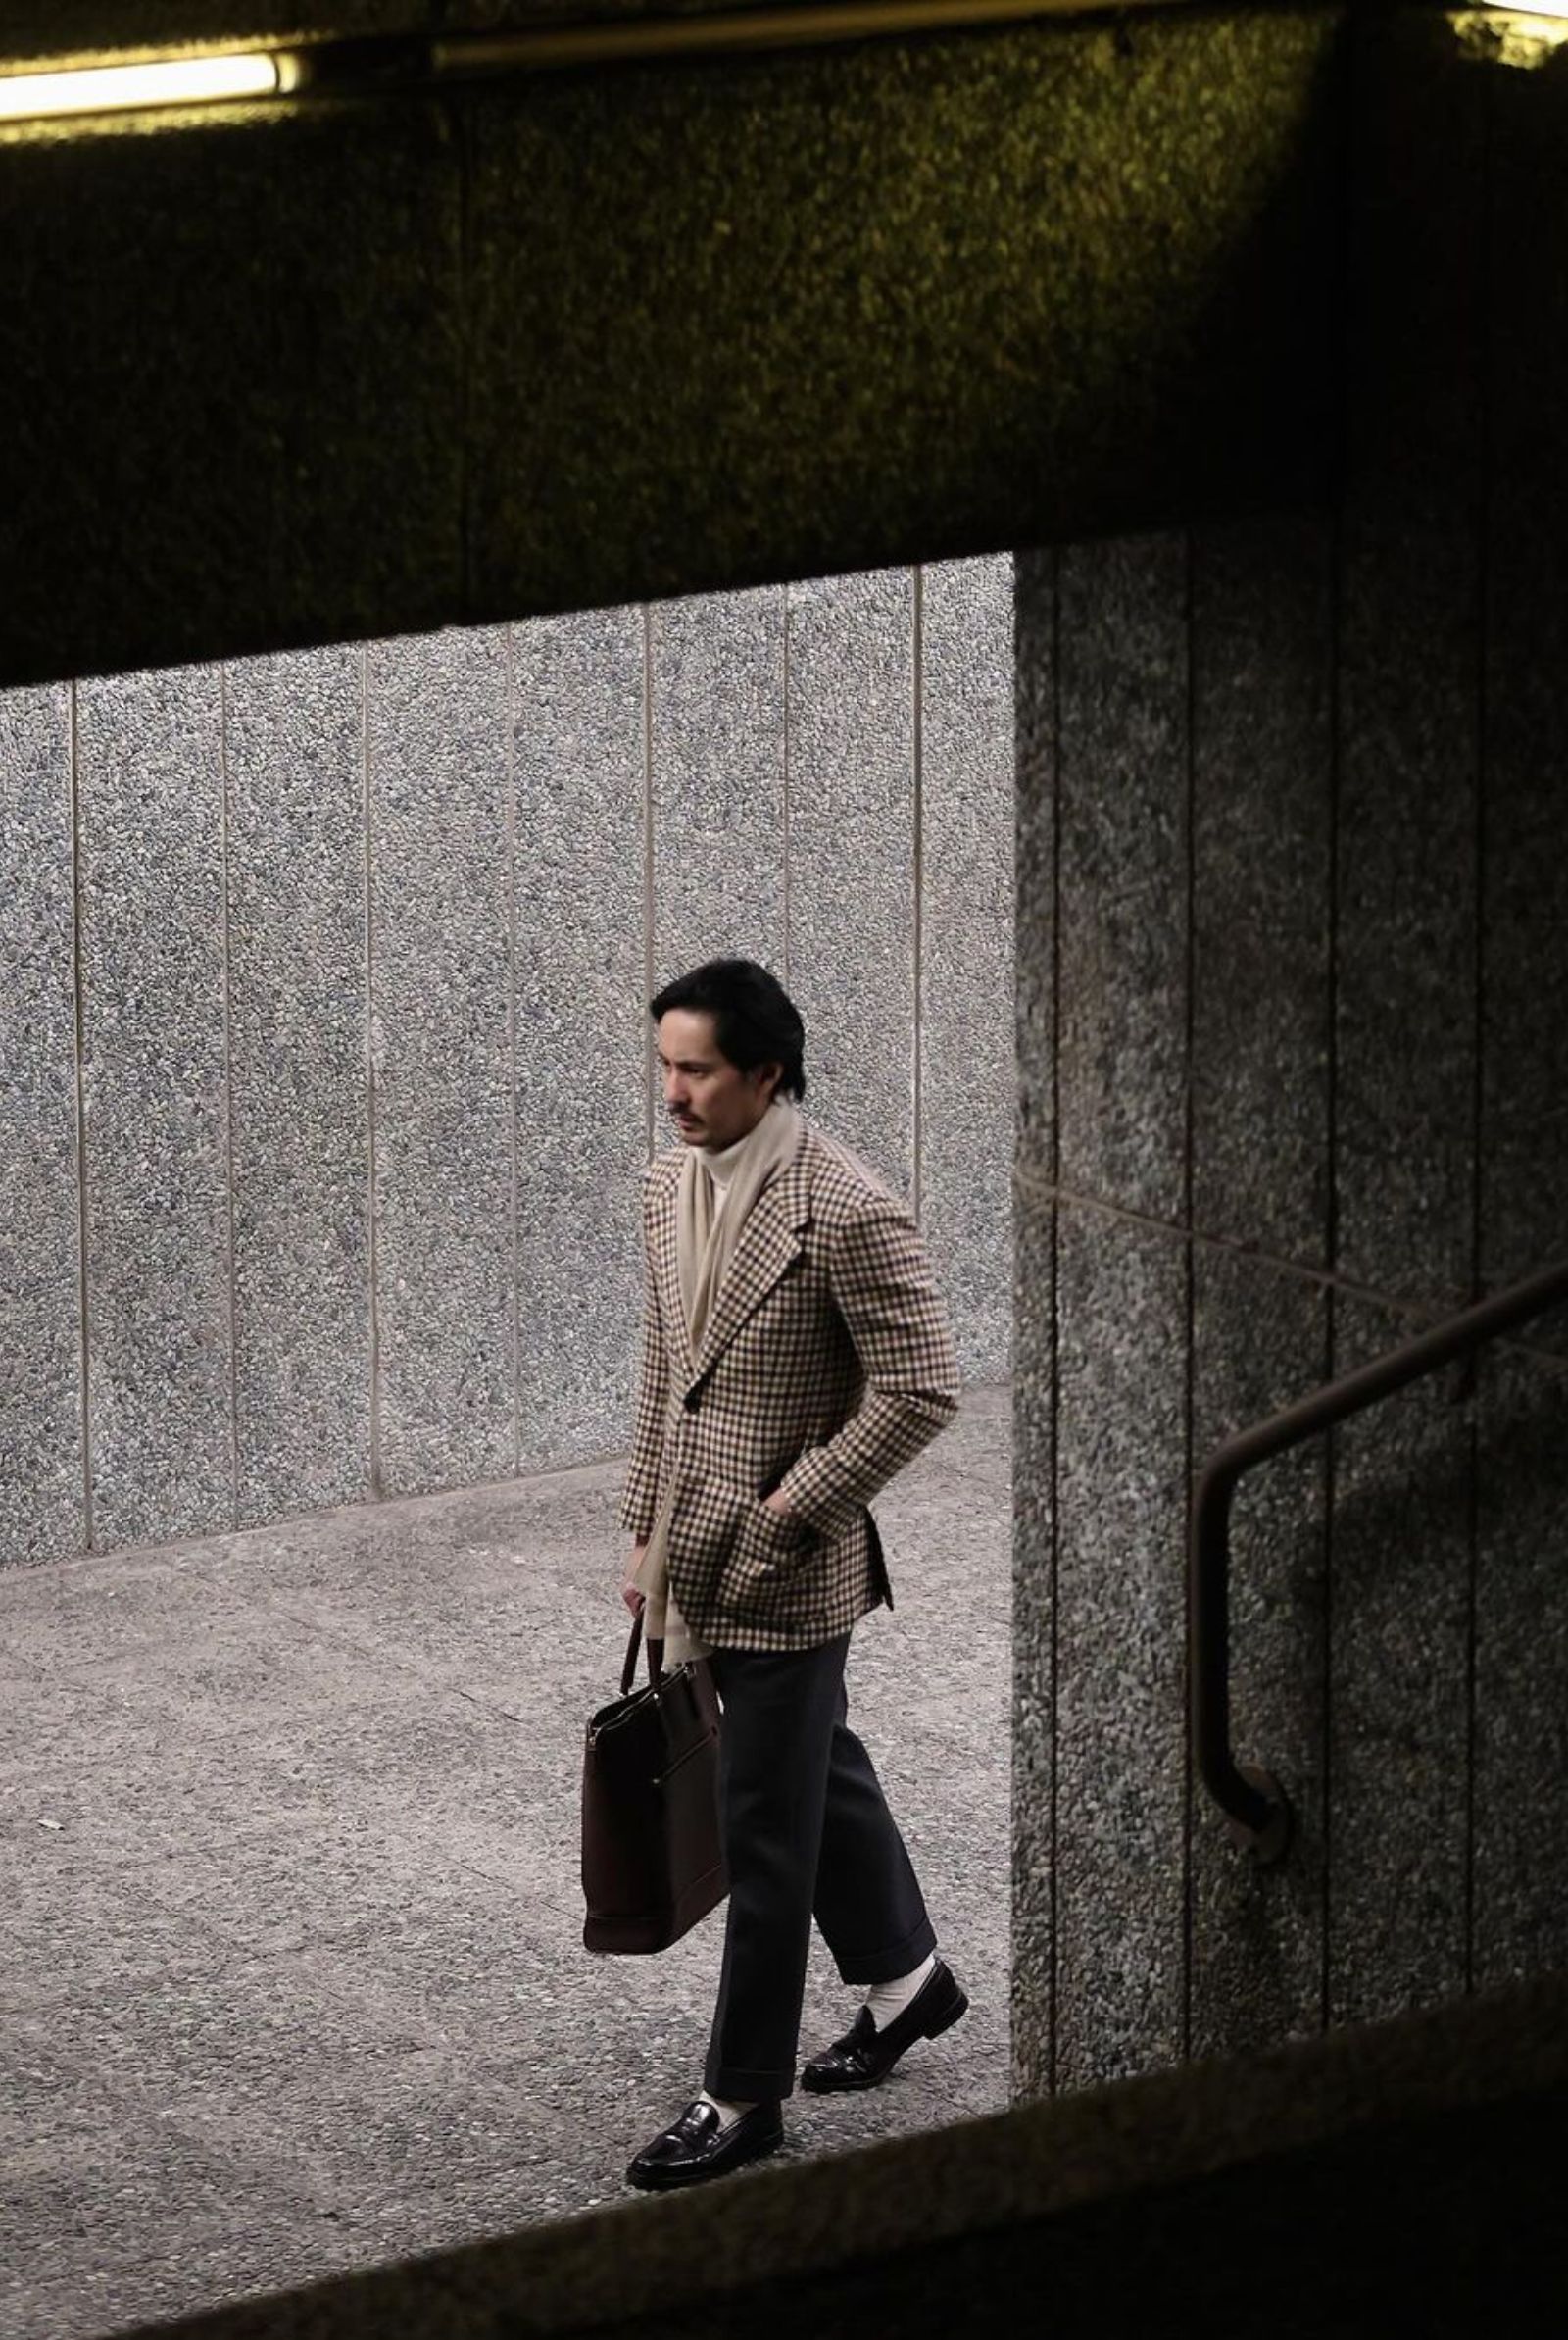 AJ Dee shows up on day 1 wearing a tweed jacket, a submariner roll neck, and wool trousers